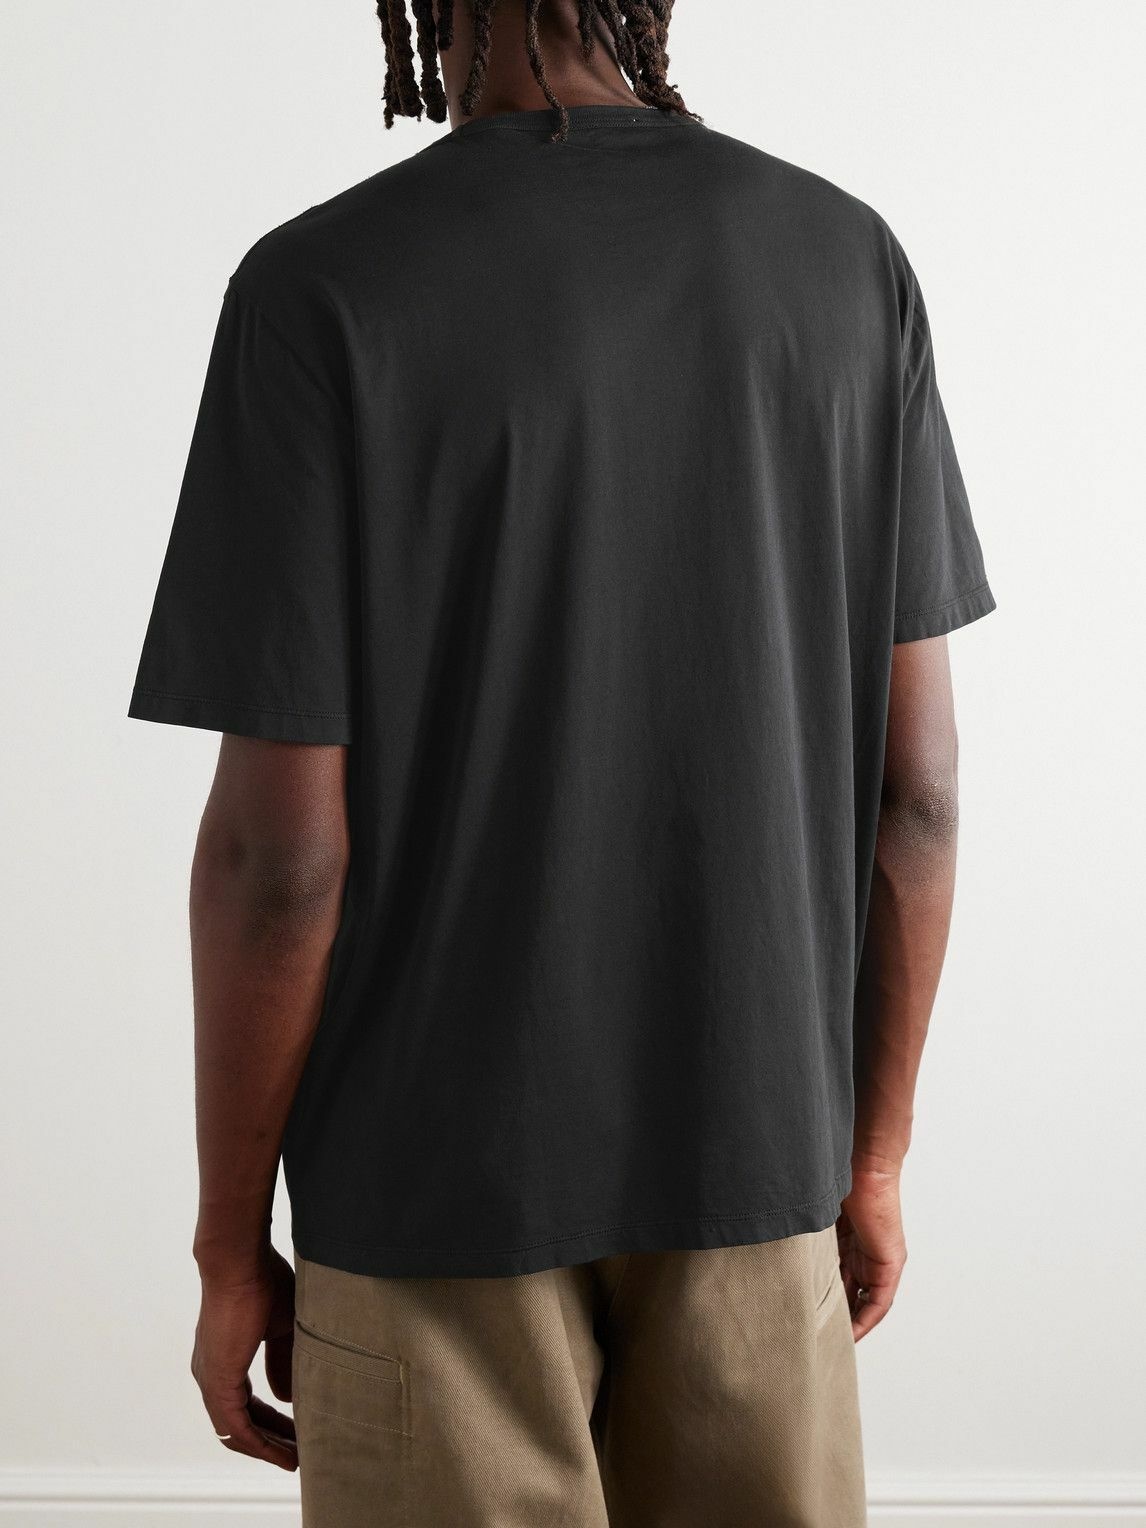 Our Legacy - New Box Cotton-Jersey T-Shirt - Black Our Legacy